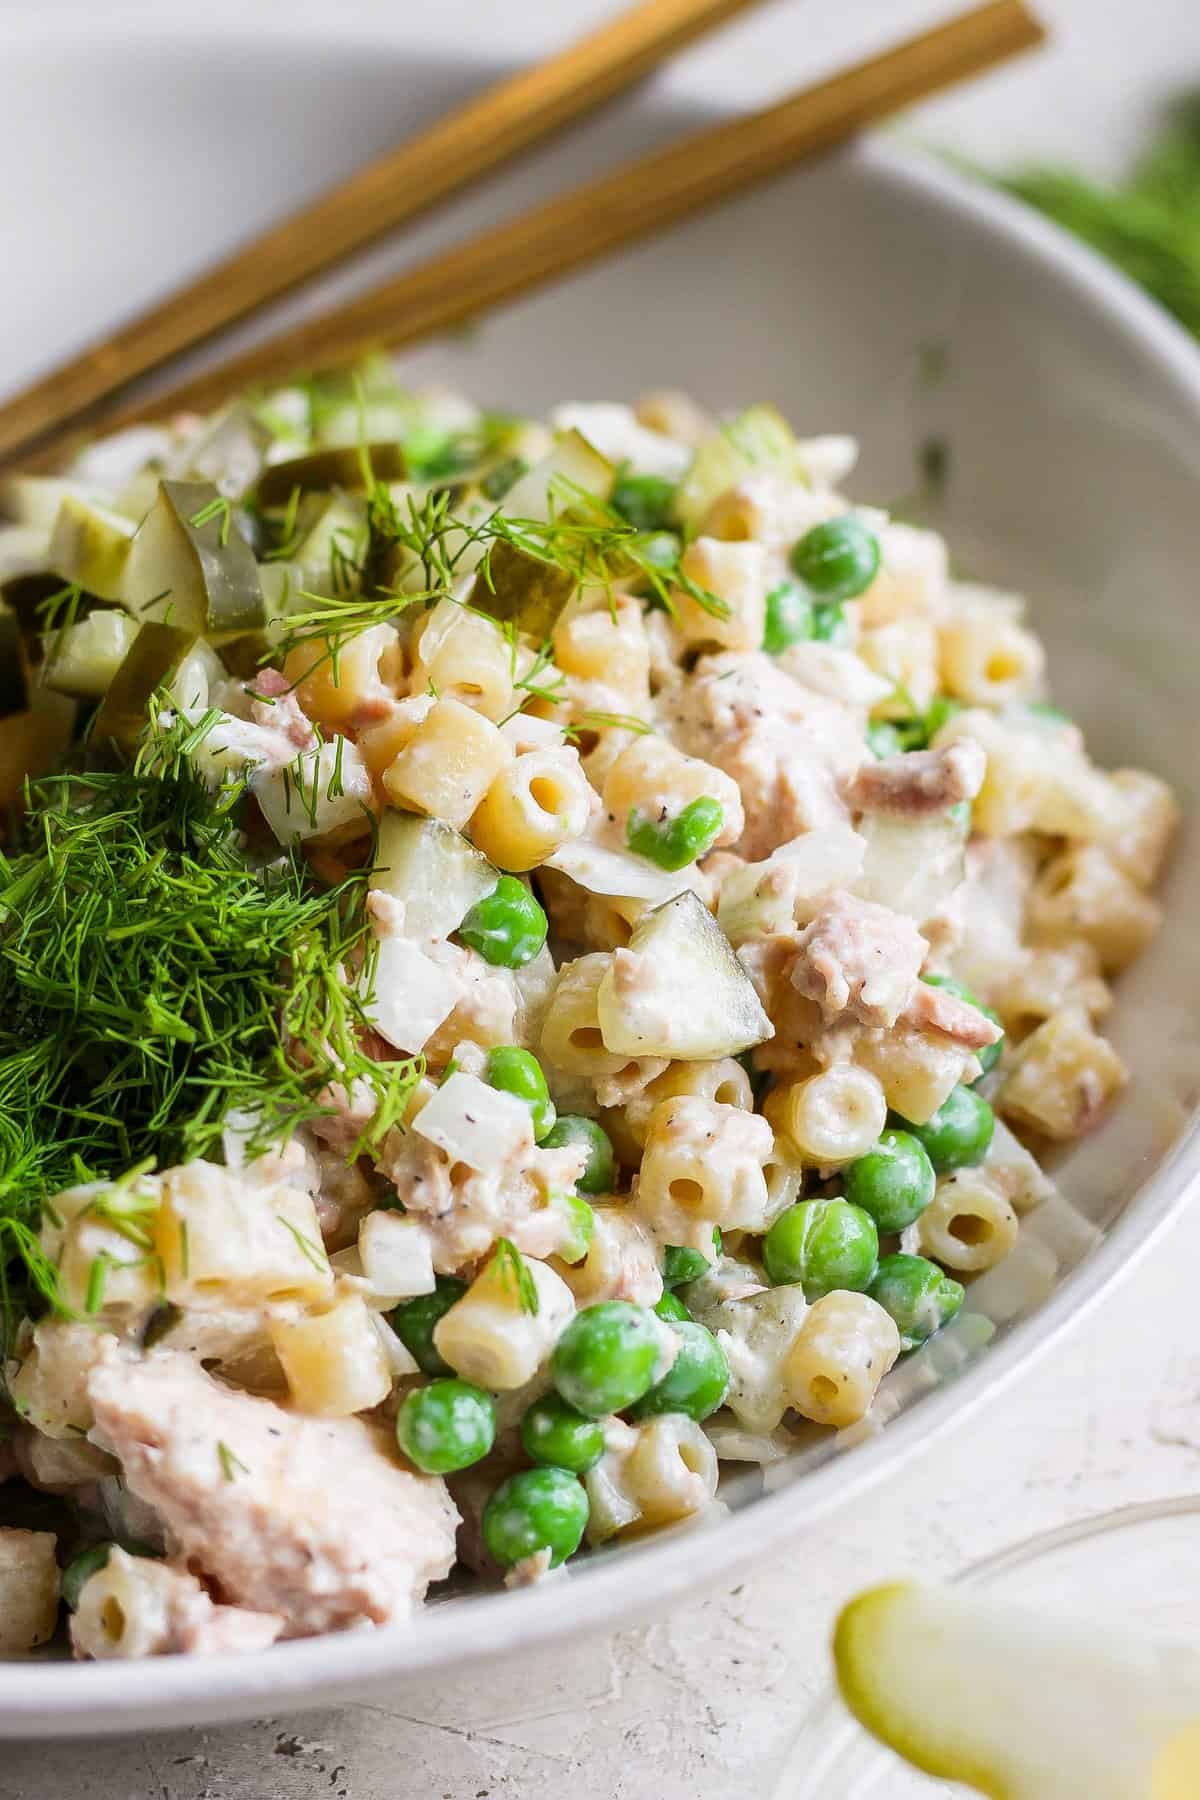 A bowl of tuna pasta salad with peas and dill, garnished with fresh herbs and served with chopsticks.